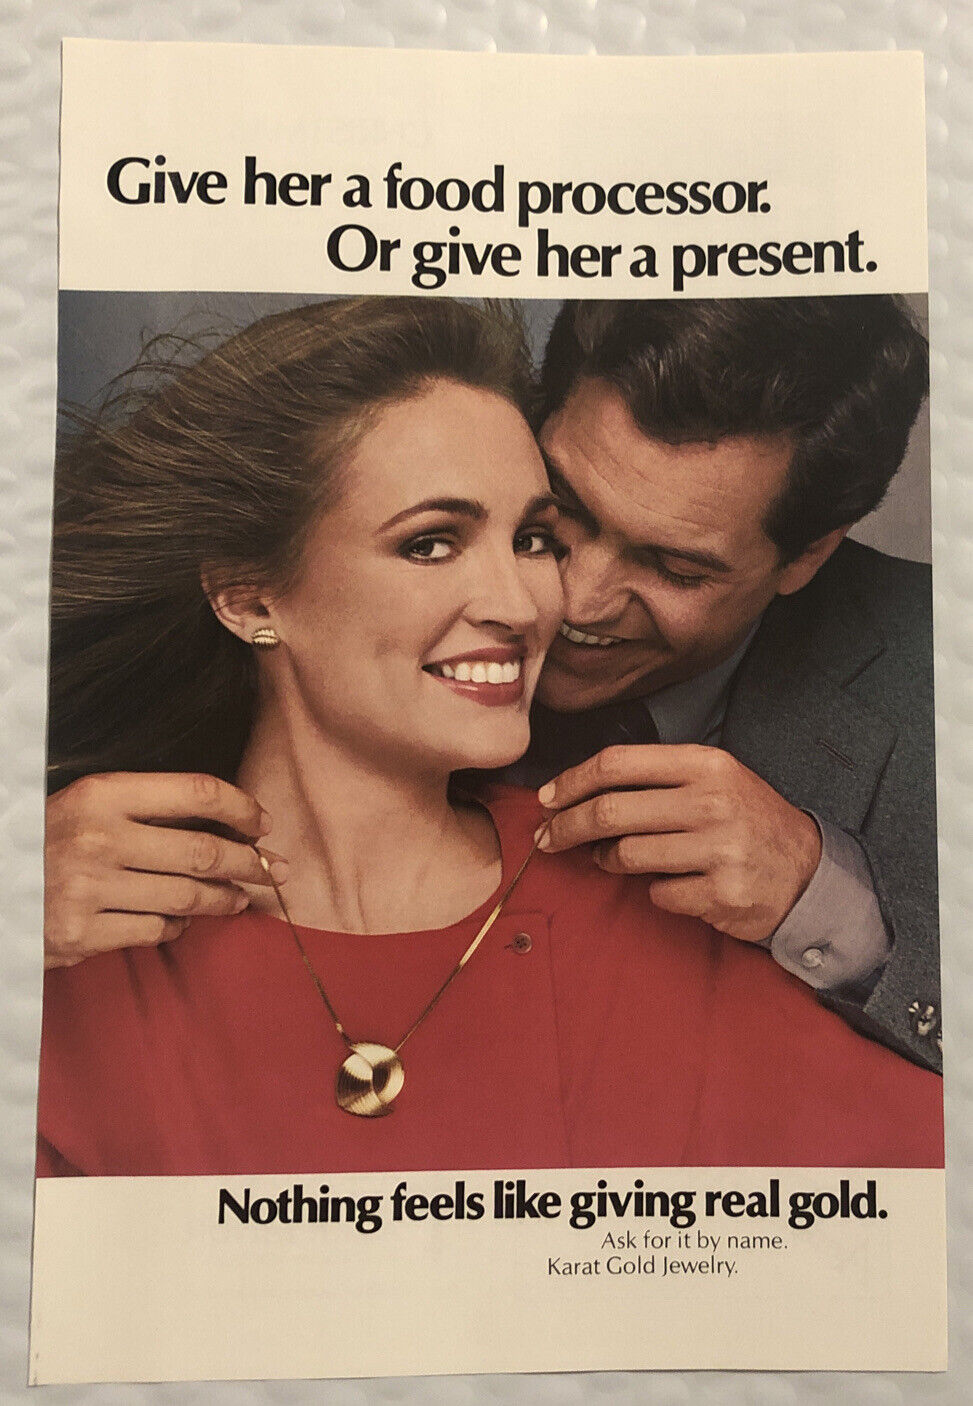 Vintage 1980 Karat Gold Jewelry Original Print Ad Full Page - Give Her A Present